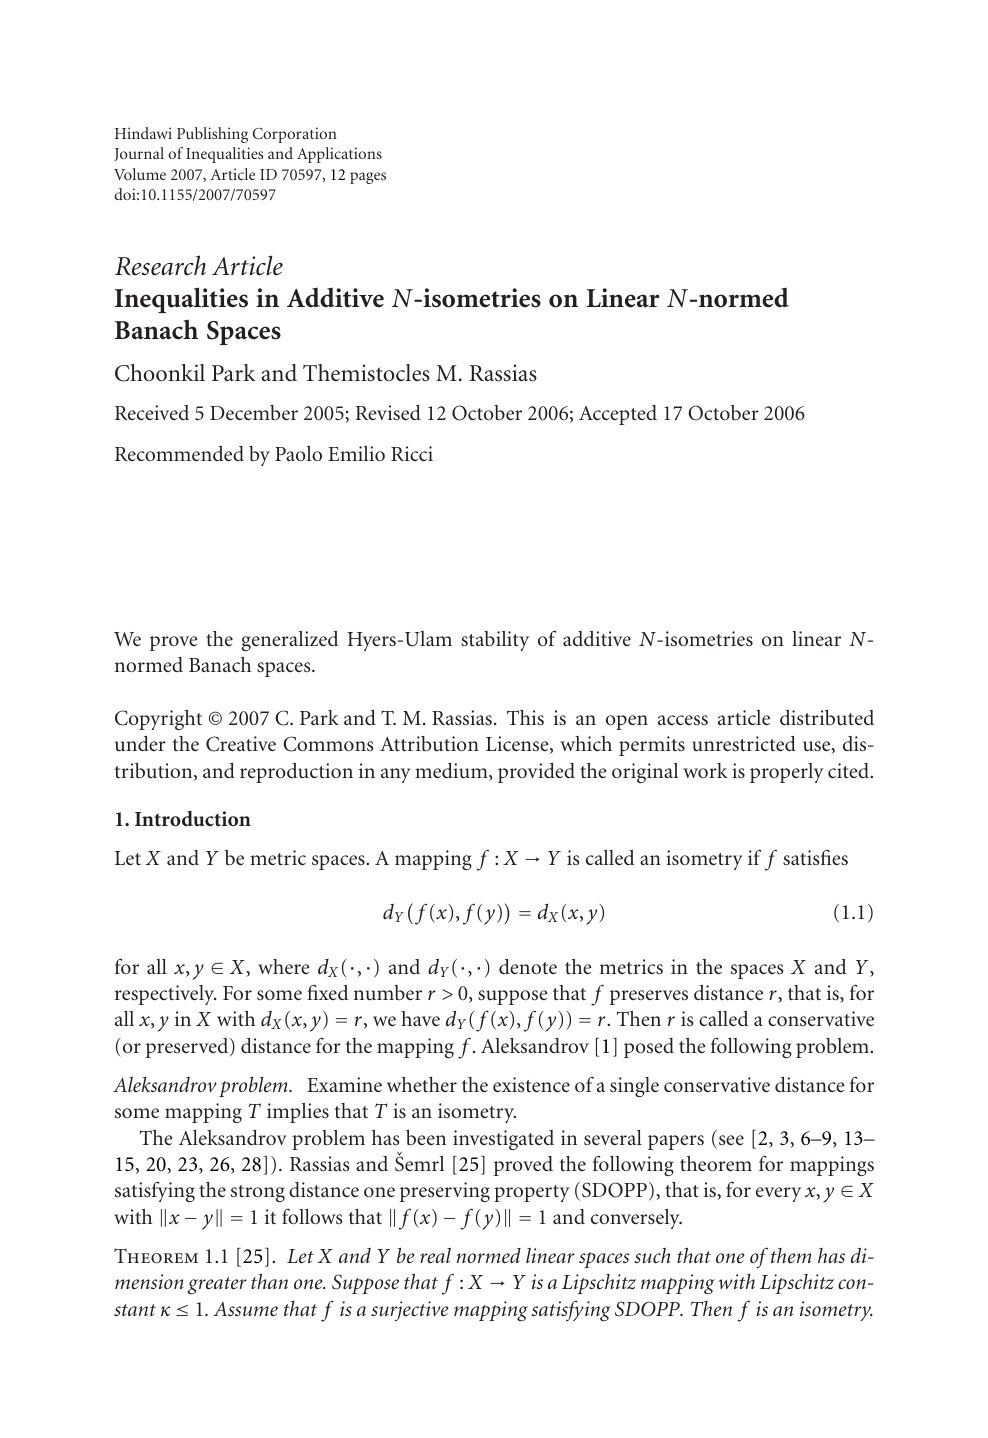 Inequalities In Additive N Isometries On Linear N Normed Banach Spaces Topic Of Research Paper In Mathematics Download Scholarly Article Pdf And Read For Free On Cyberleninka Open Science Hub